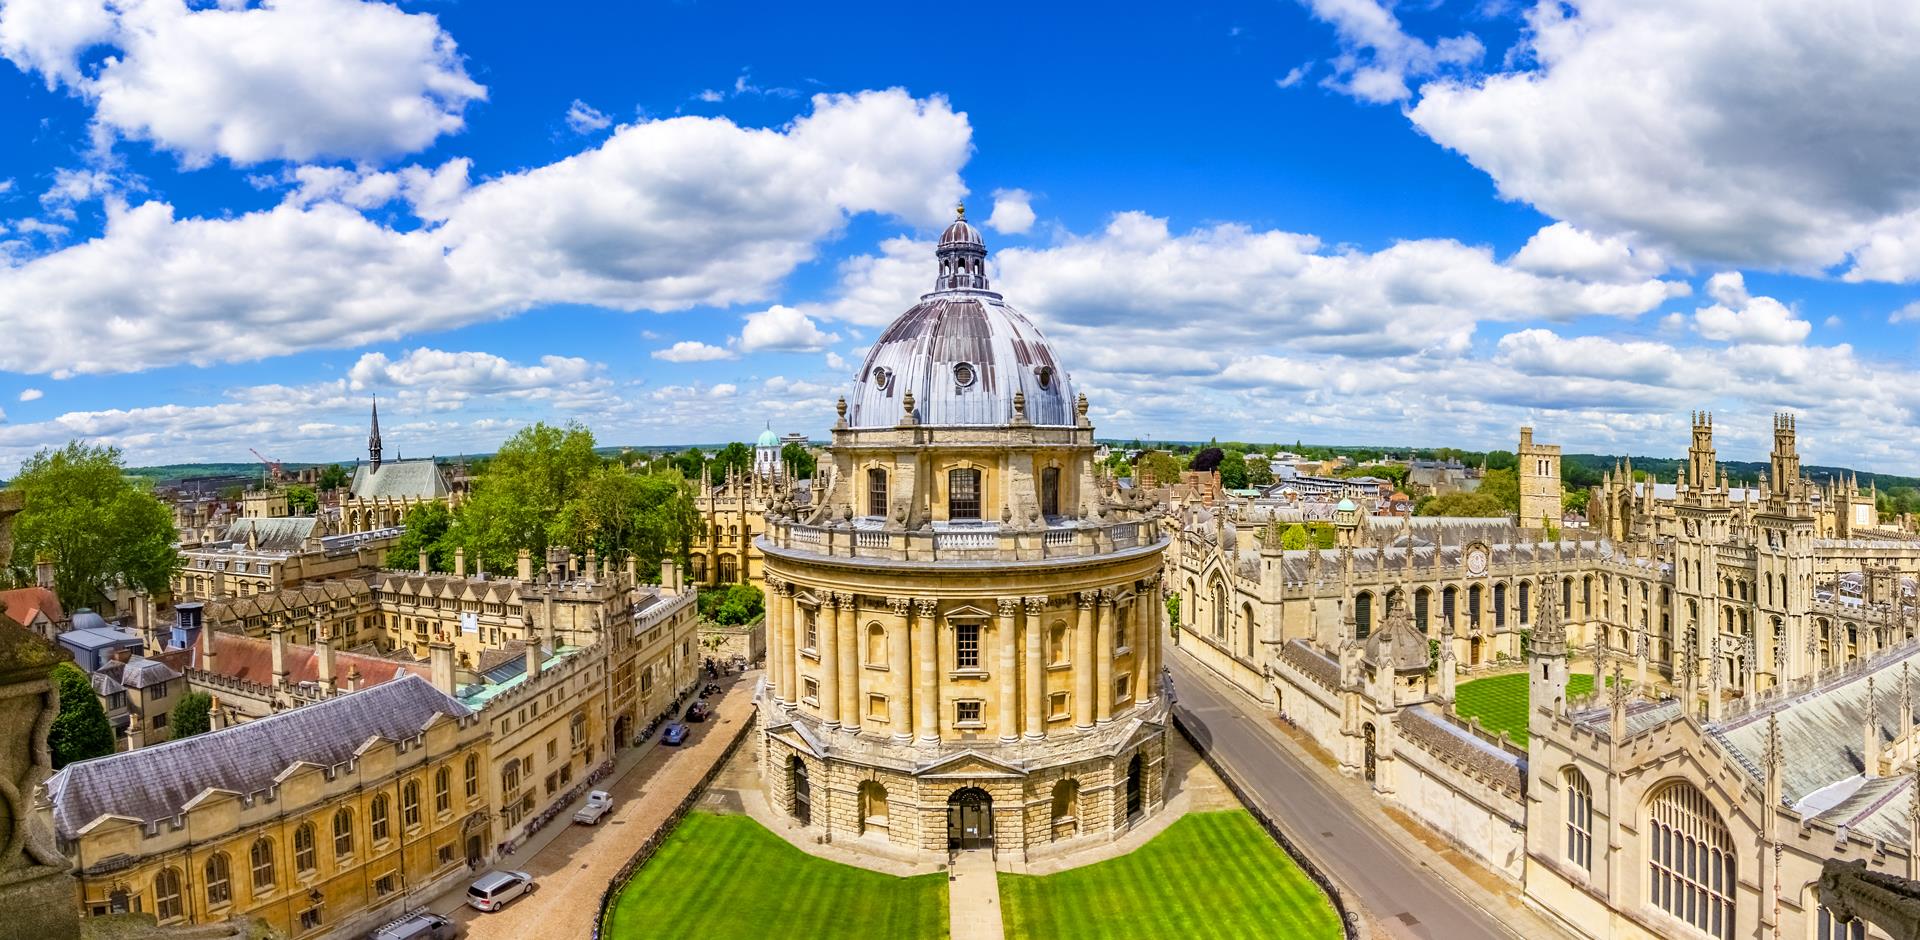 Bodleian Library and All Souls College, Oxfordshire, England.